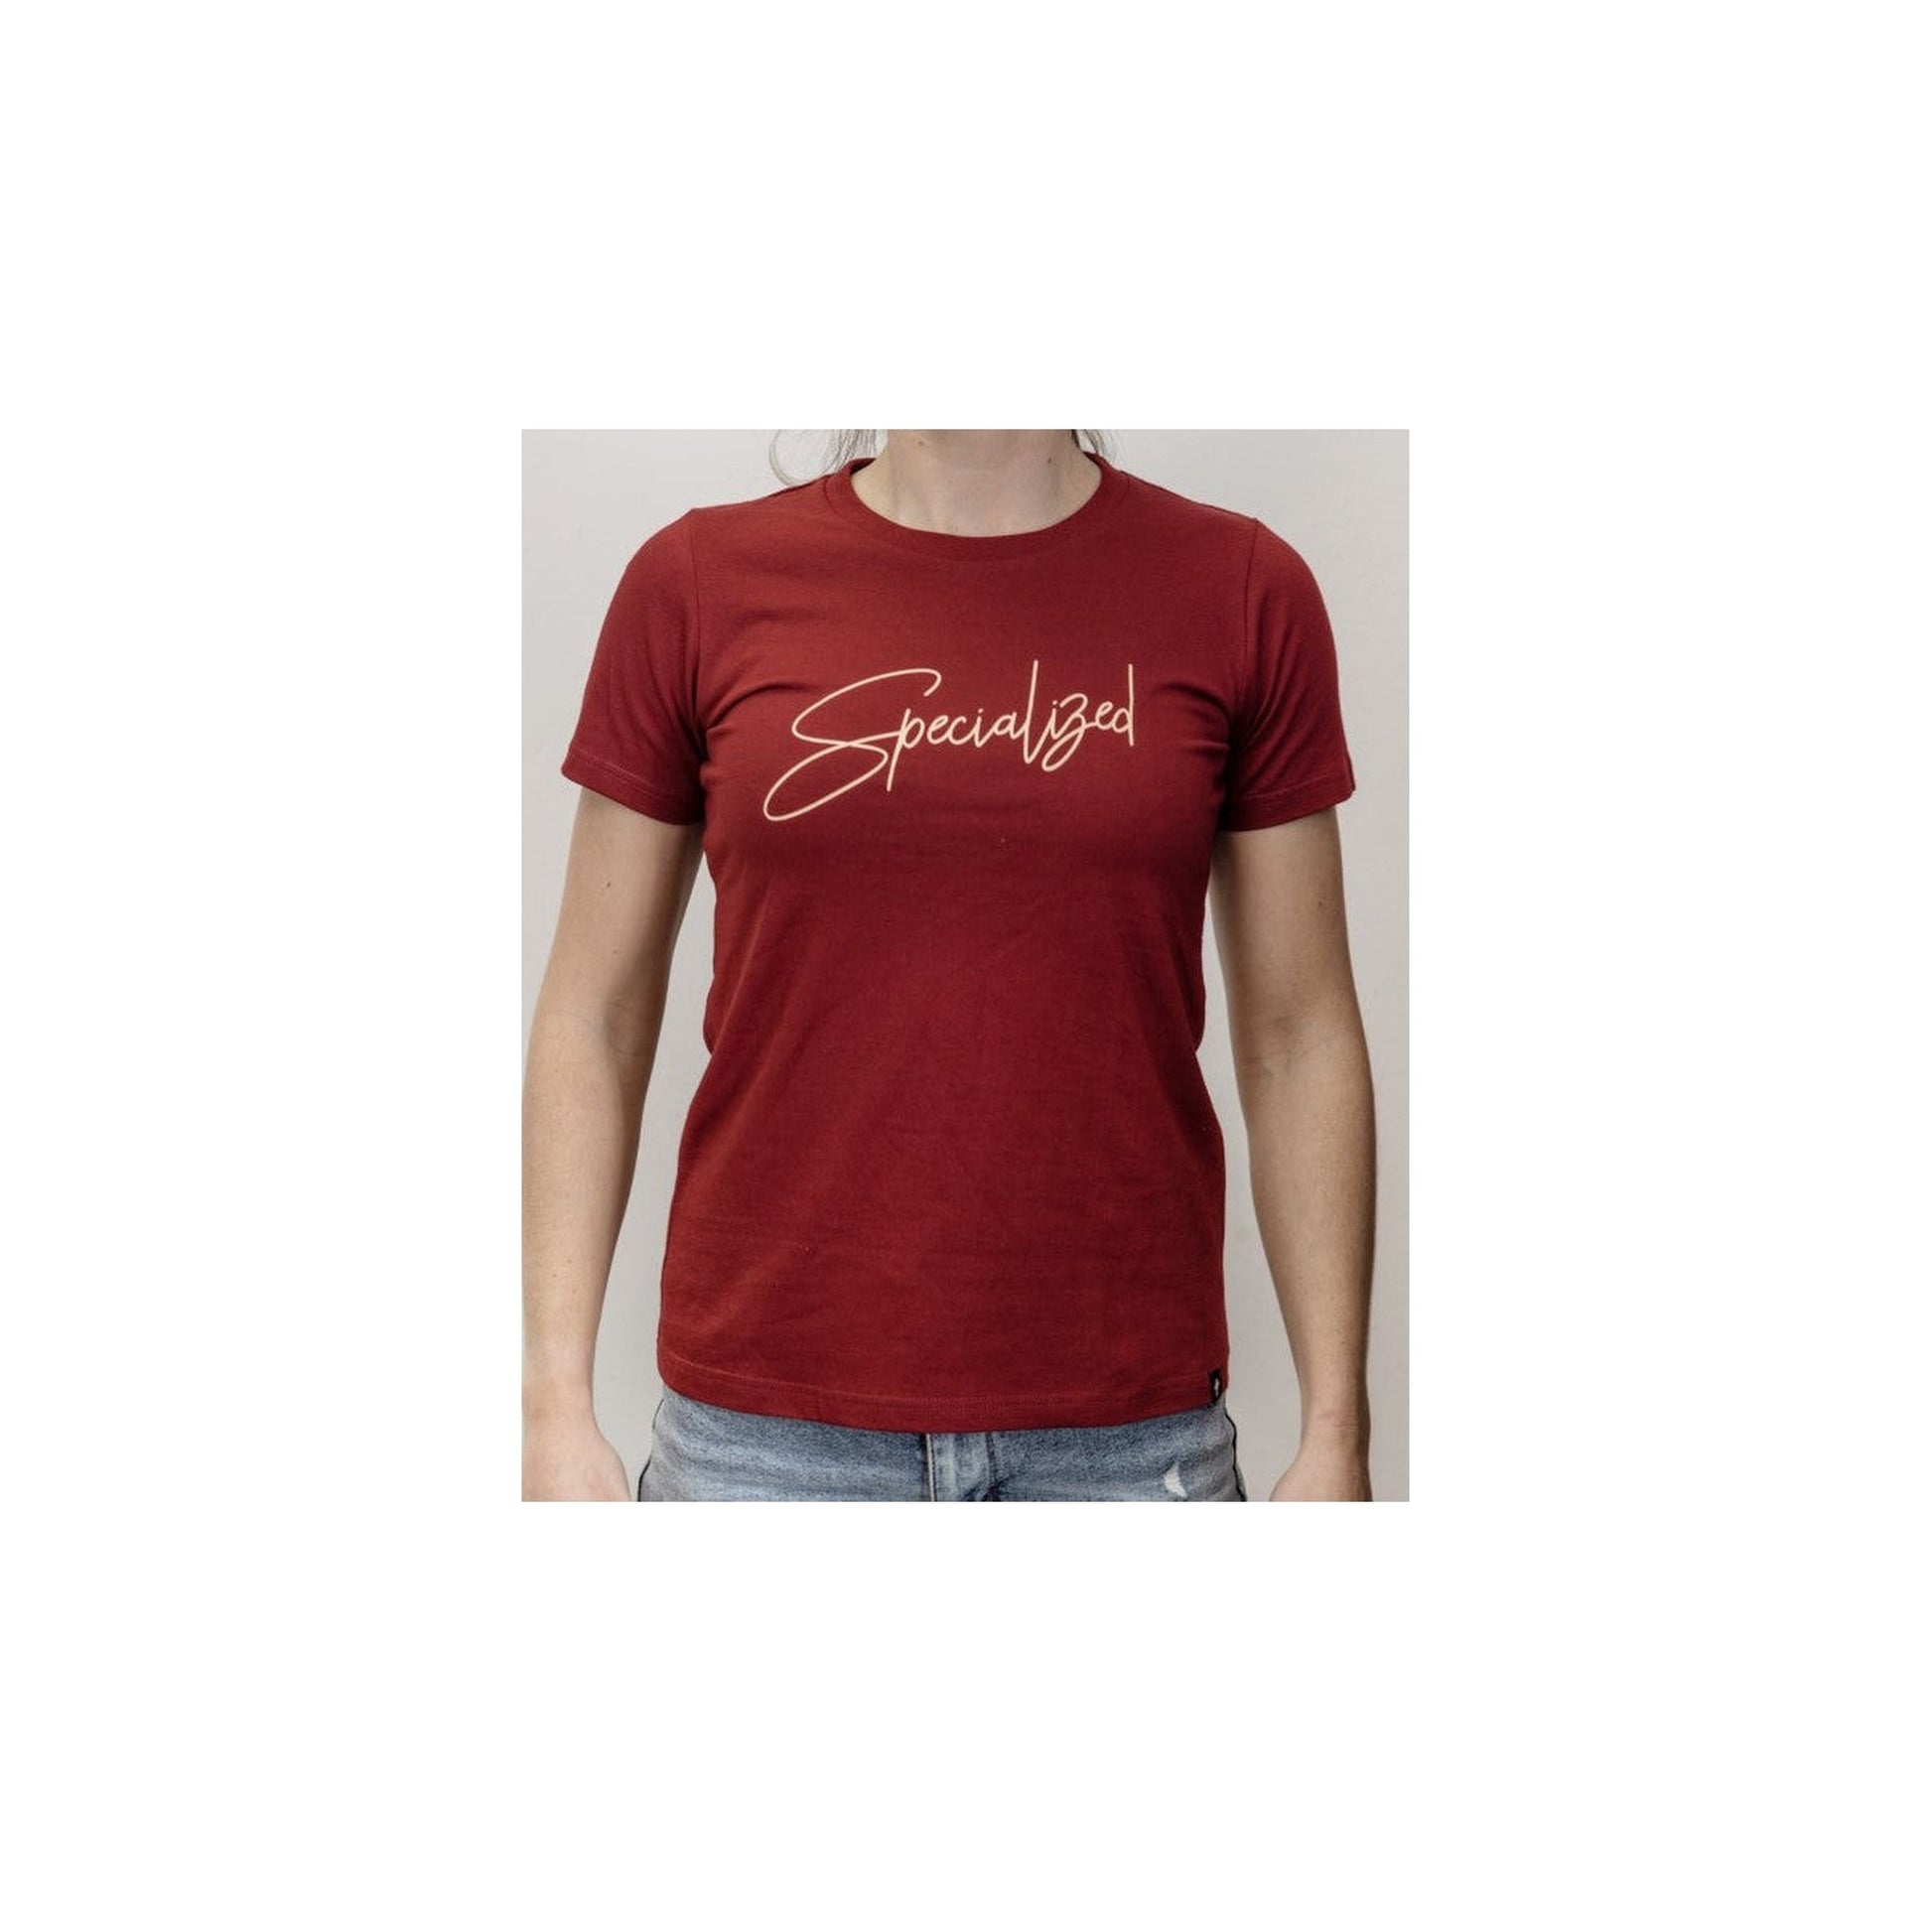 Specialized Cursive Tee Women-Cycles Direct Specialized